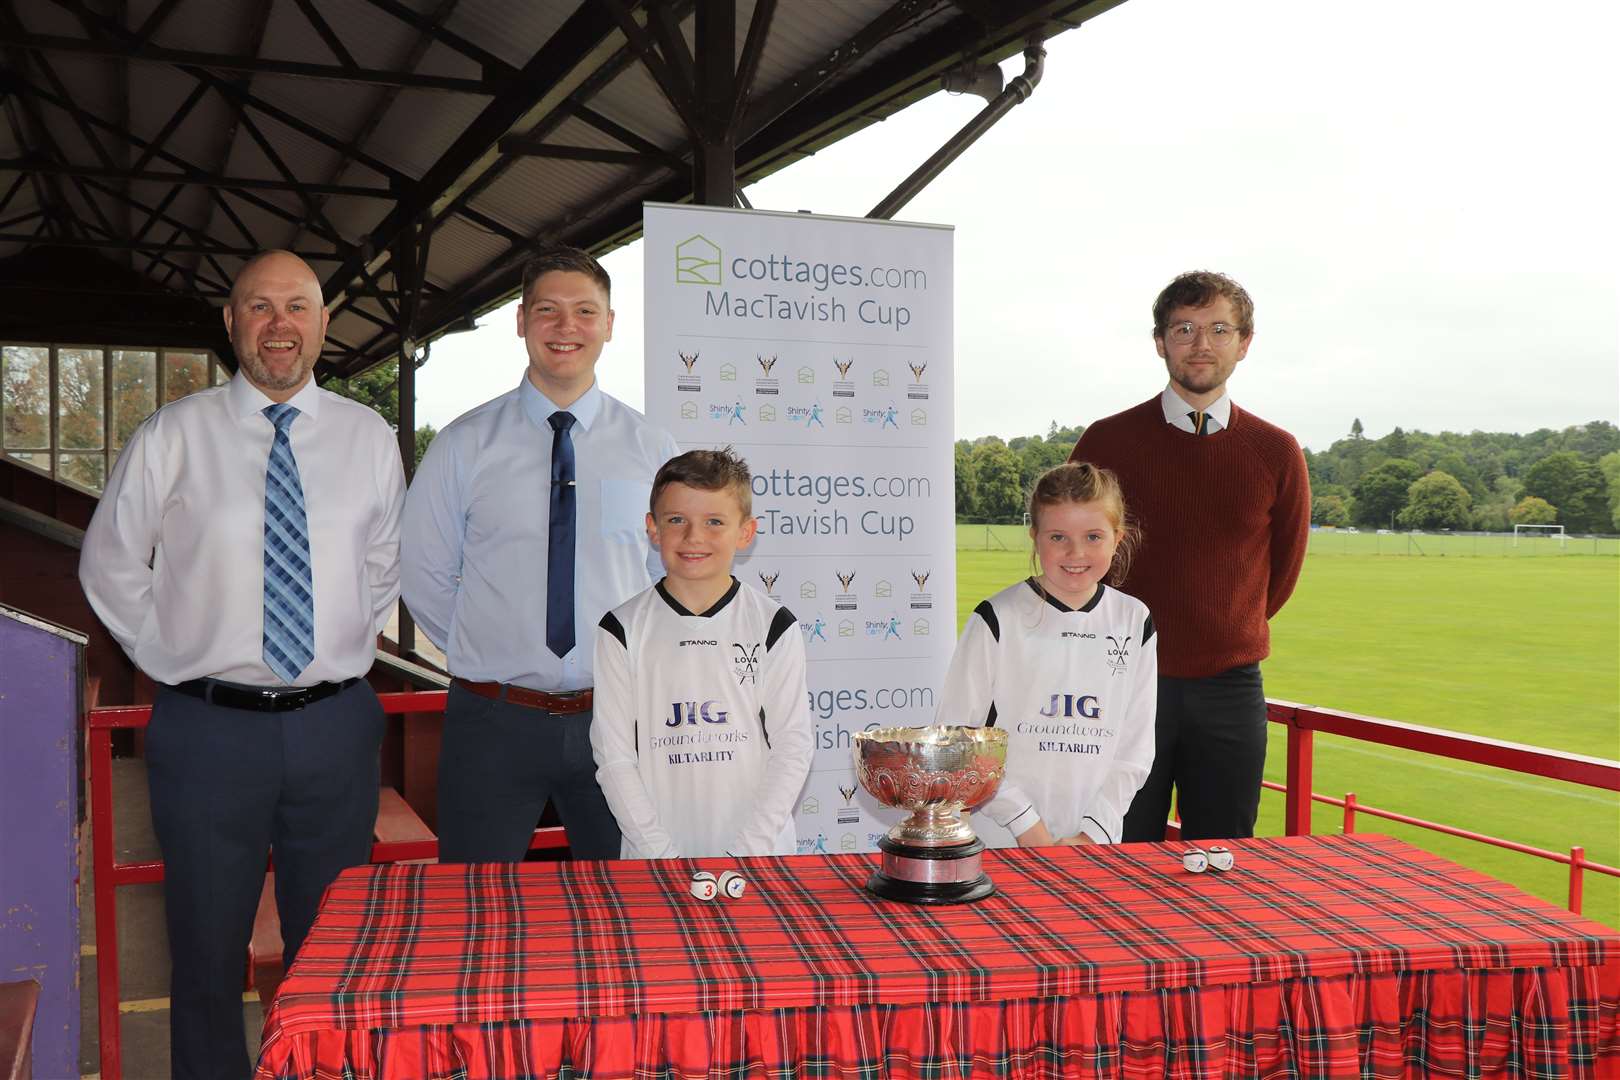 Aaron Gallacher (11) and Amy Urquhart (10) from Lovat Shinty Club conducted the semi final draw. Also in attendance were Mark Whitehouse; Stuart Walkden and Luke Smith from sponsors Cottages.com and Camanachd Association CEO Derek Keir.